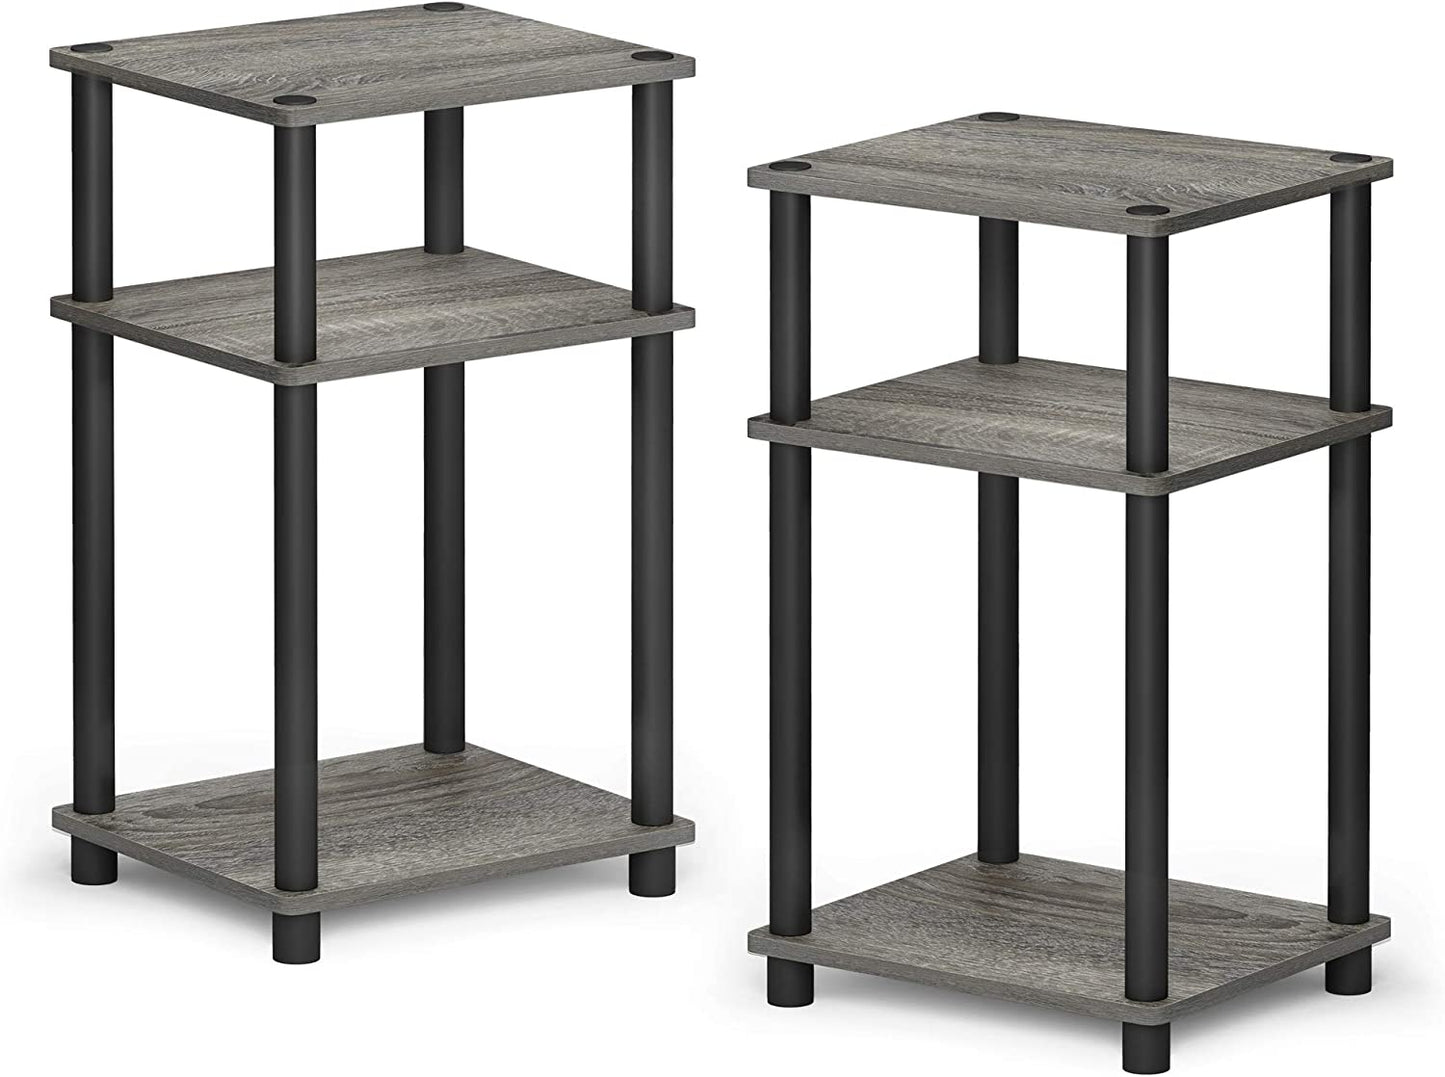 Just 3-Tier Turn-N-Tube End Table / Side Table / Night Stand / Bedside Table with Plastic Poles, 2-Pack, French Oak Grey/Black